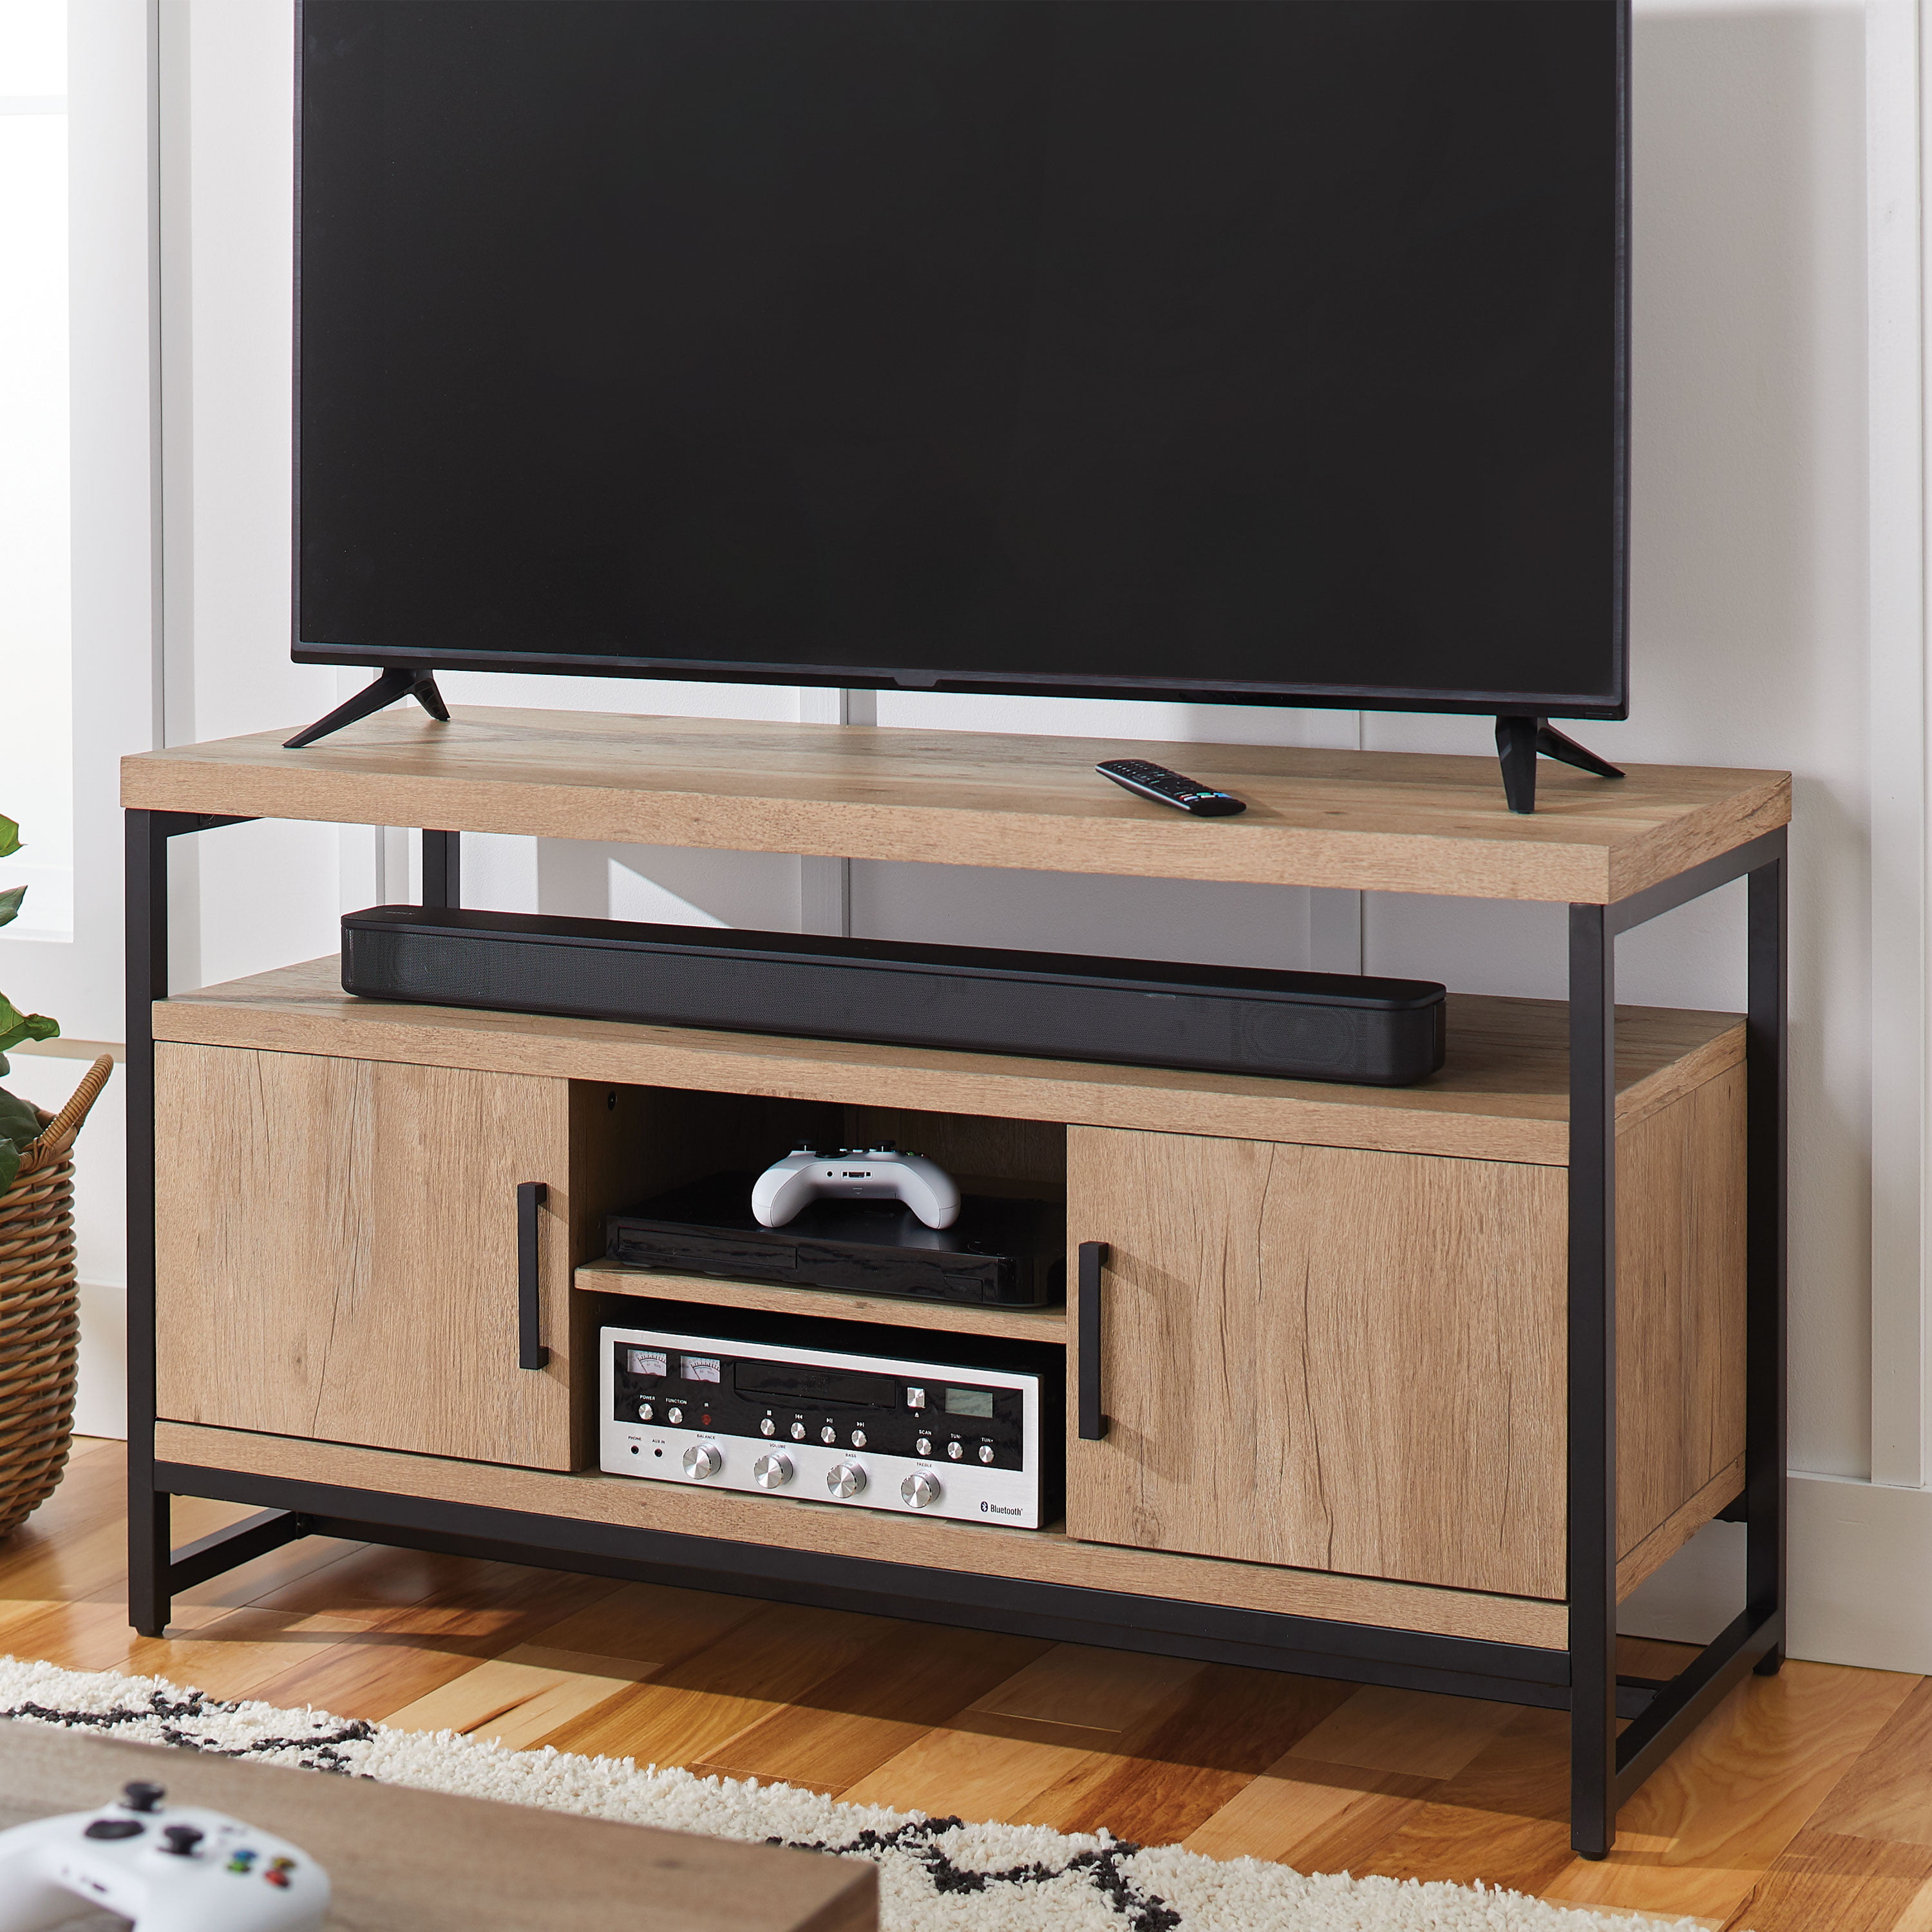 Better Homes & Gardens Jace Industrial Wood Rectangle Media Console (Natural Oak, for TVs up to 55 in) $125 + Free Shipping